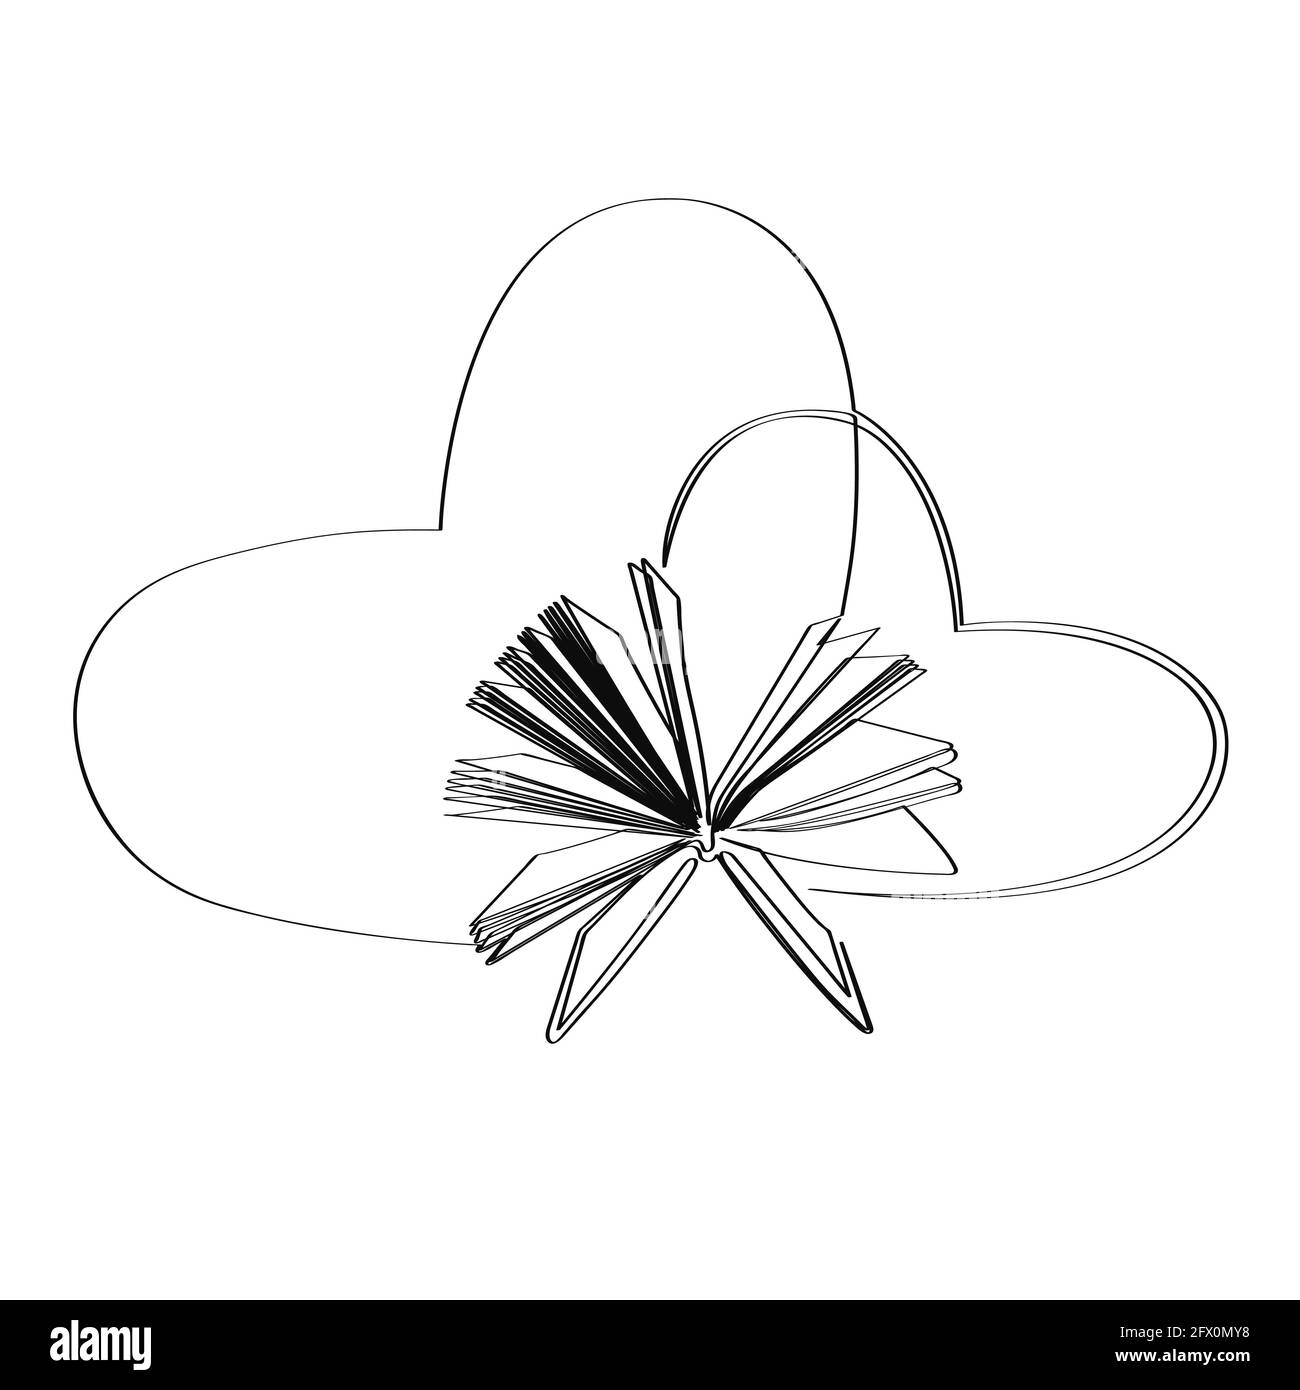 Open book of love. Drawn with one continuous line. Isolated on white background stock vector illustration. Stock Vector